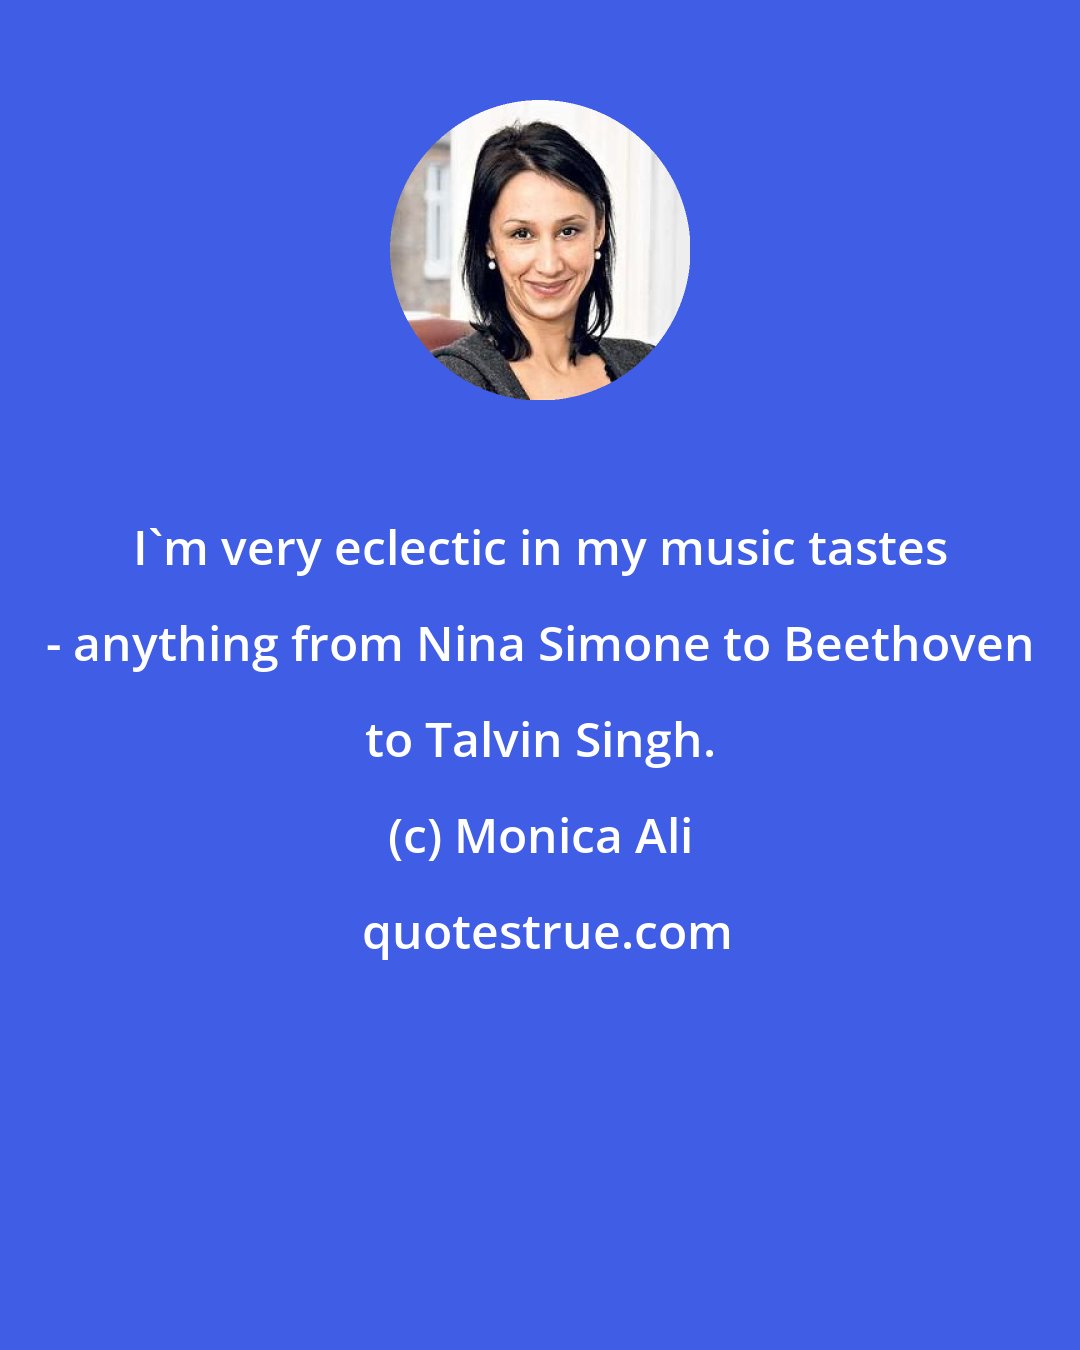 Monica Ali: I'm very eclectic in my music tastes - anything from Nina Simone to Beethoven to Talvin Singh.